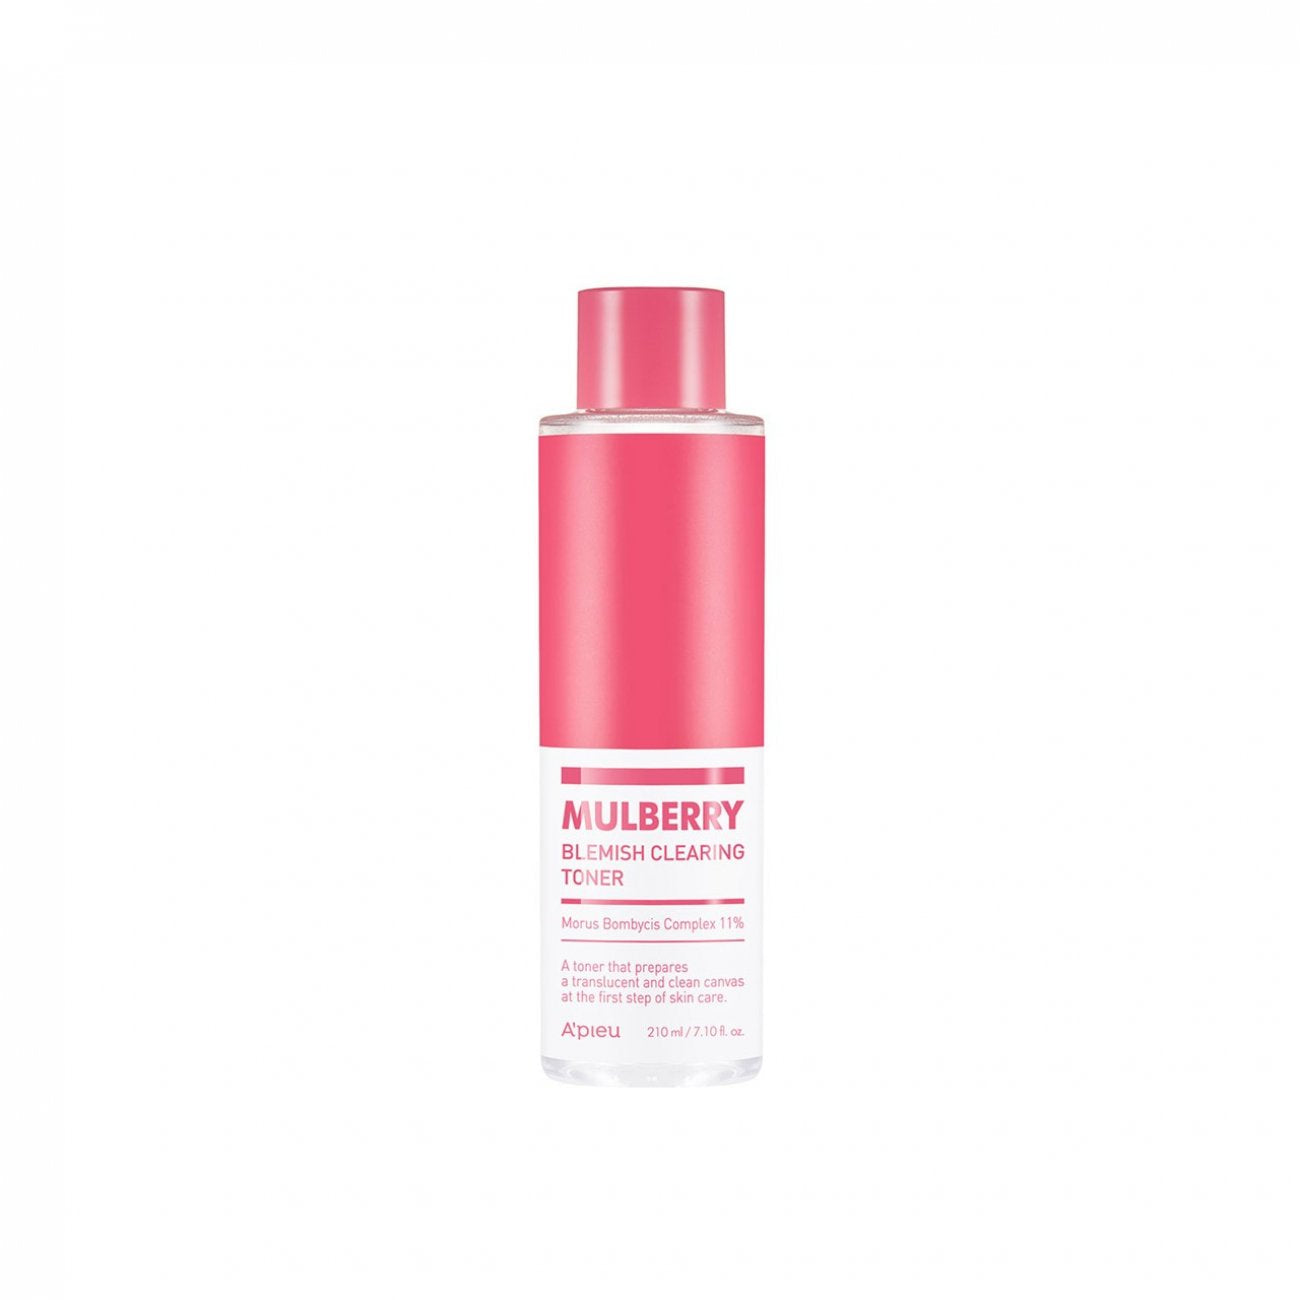 Mulberry Blemish Clearing Toner 210ml